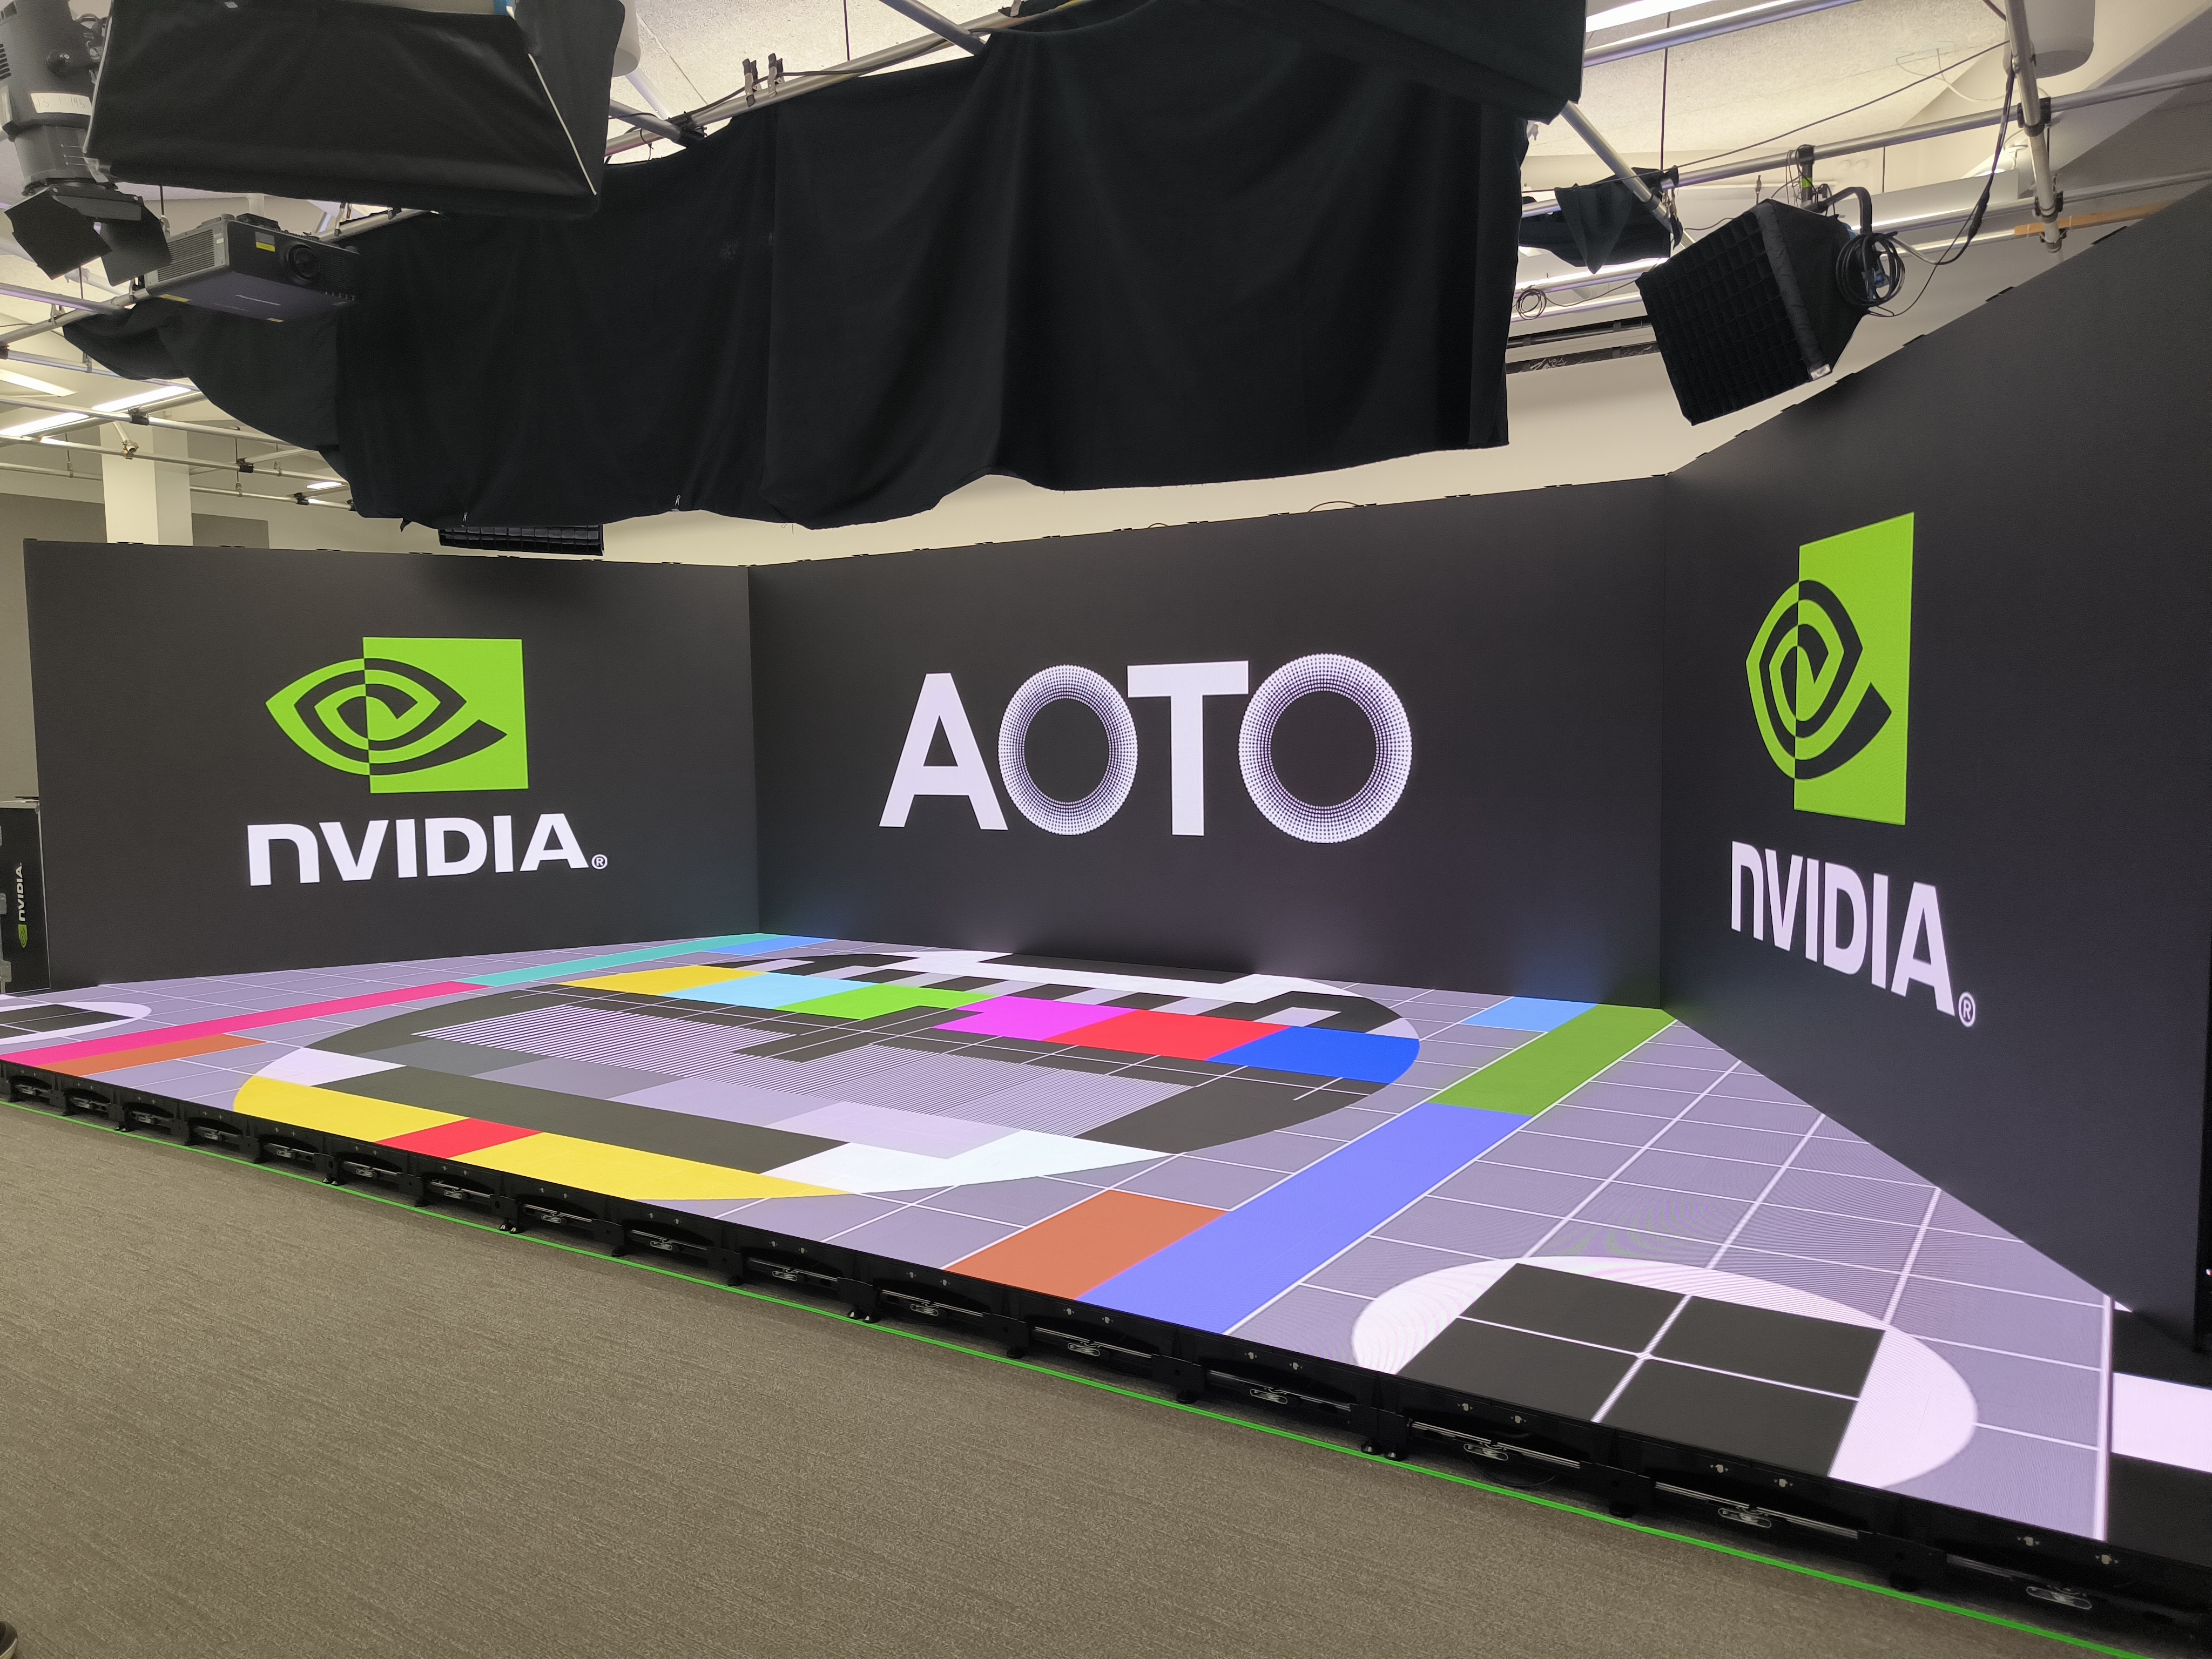 AOTO Electronics and NVIDIA have once again joined forces to create a brand-new XR Studio